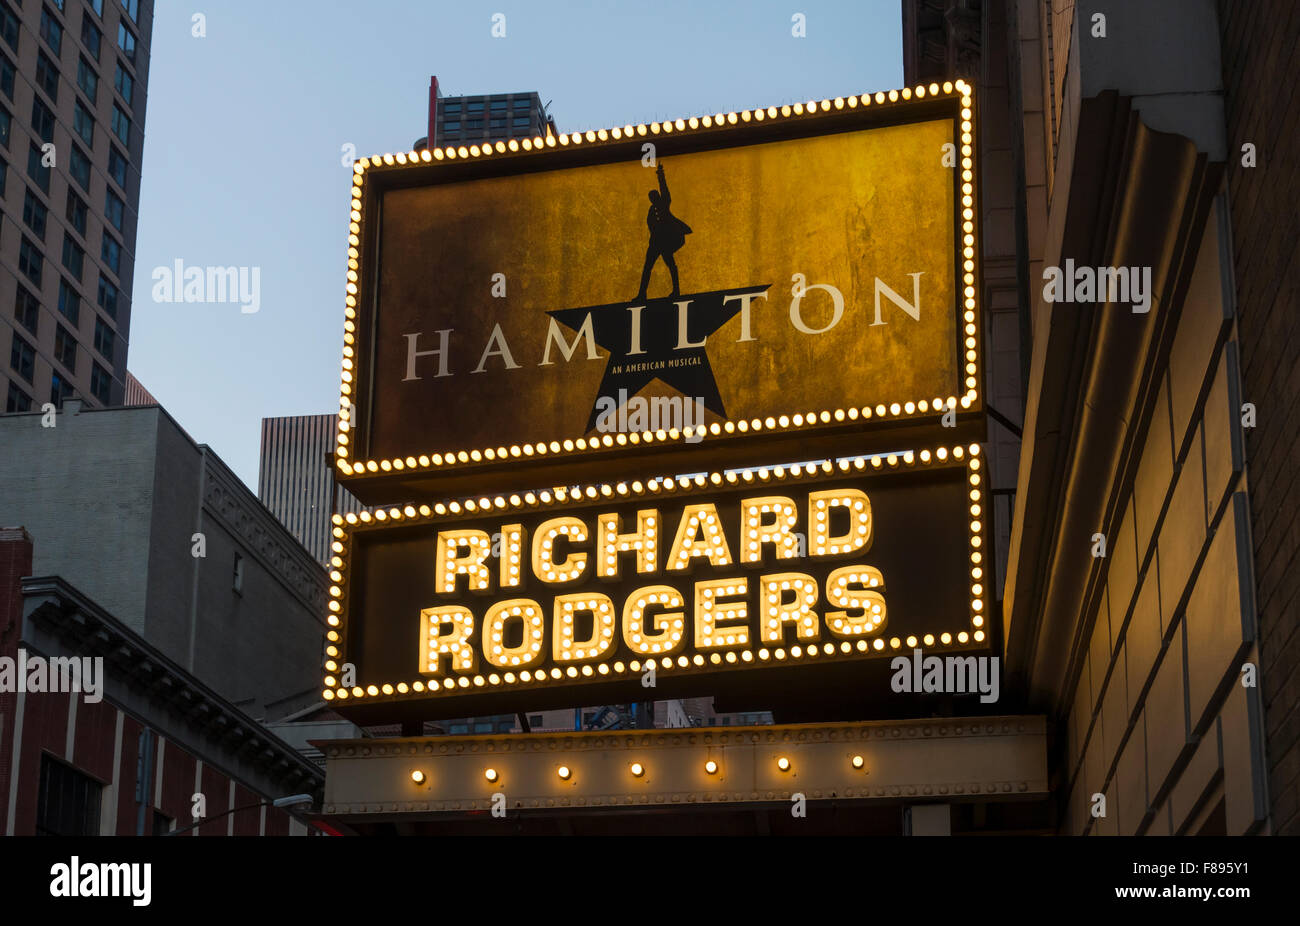 Hamilton - the Broadway musical - at the Richard Rodgers Theater in New York City Stock Photo